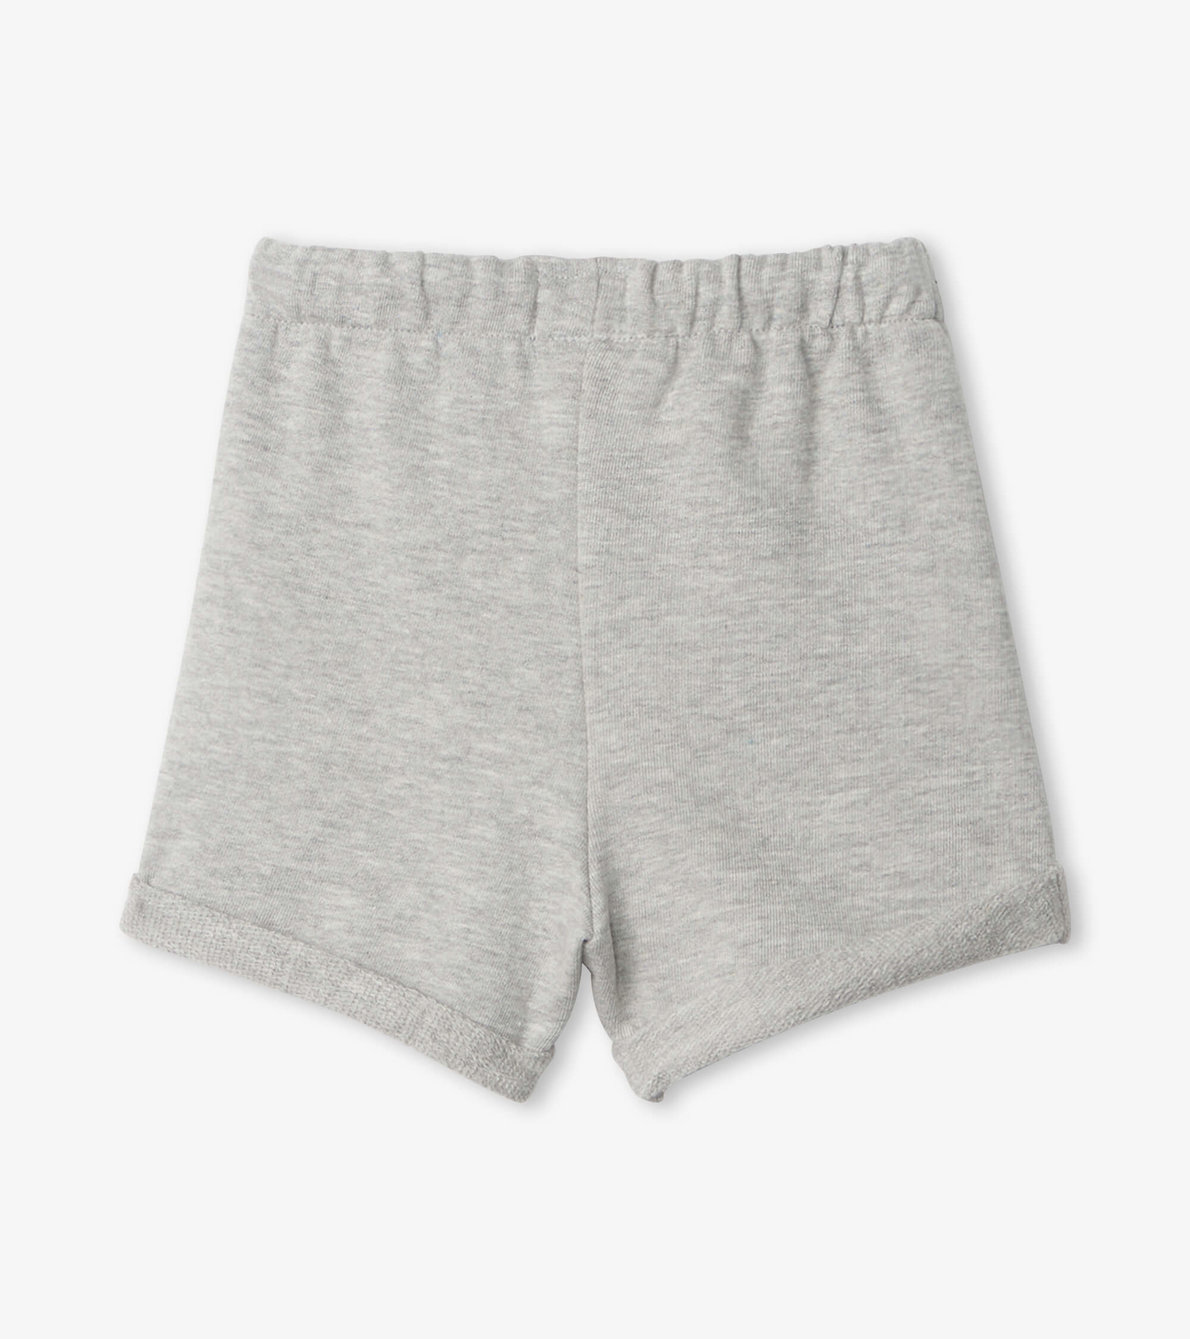 View larger image of Grey French Terry Baby Shorts